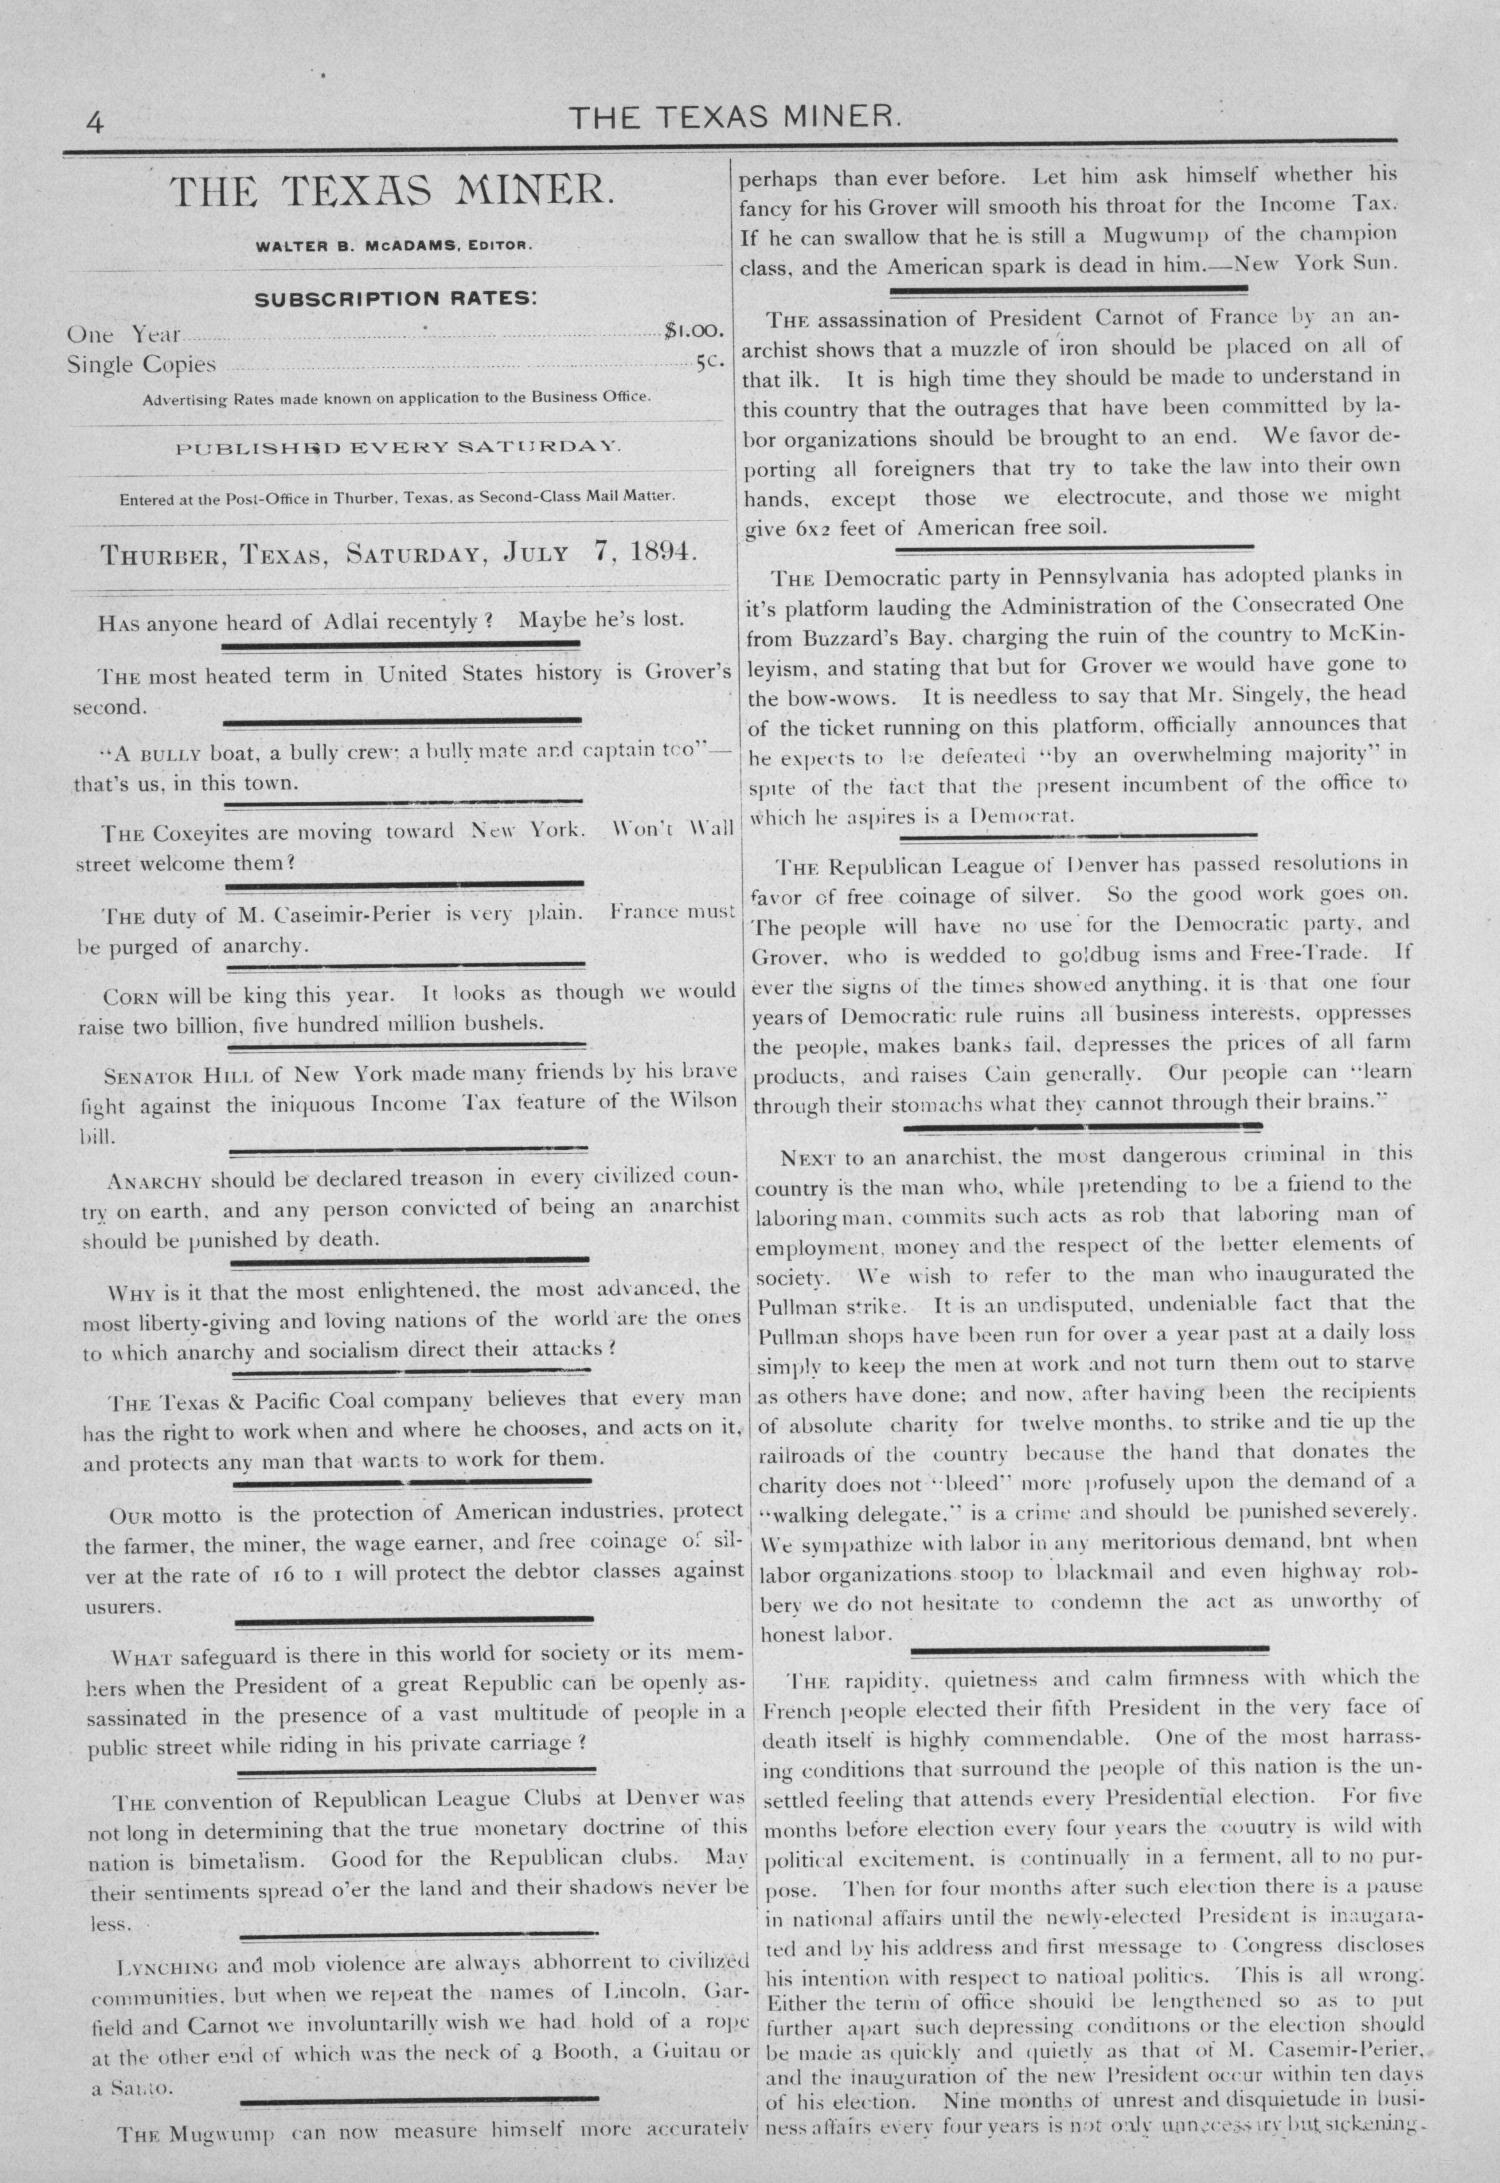 The Texas Miner, Volume 1, Number 25, July 7, 1894
                                                
                                                    4
                                                